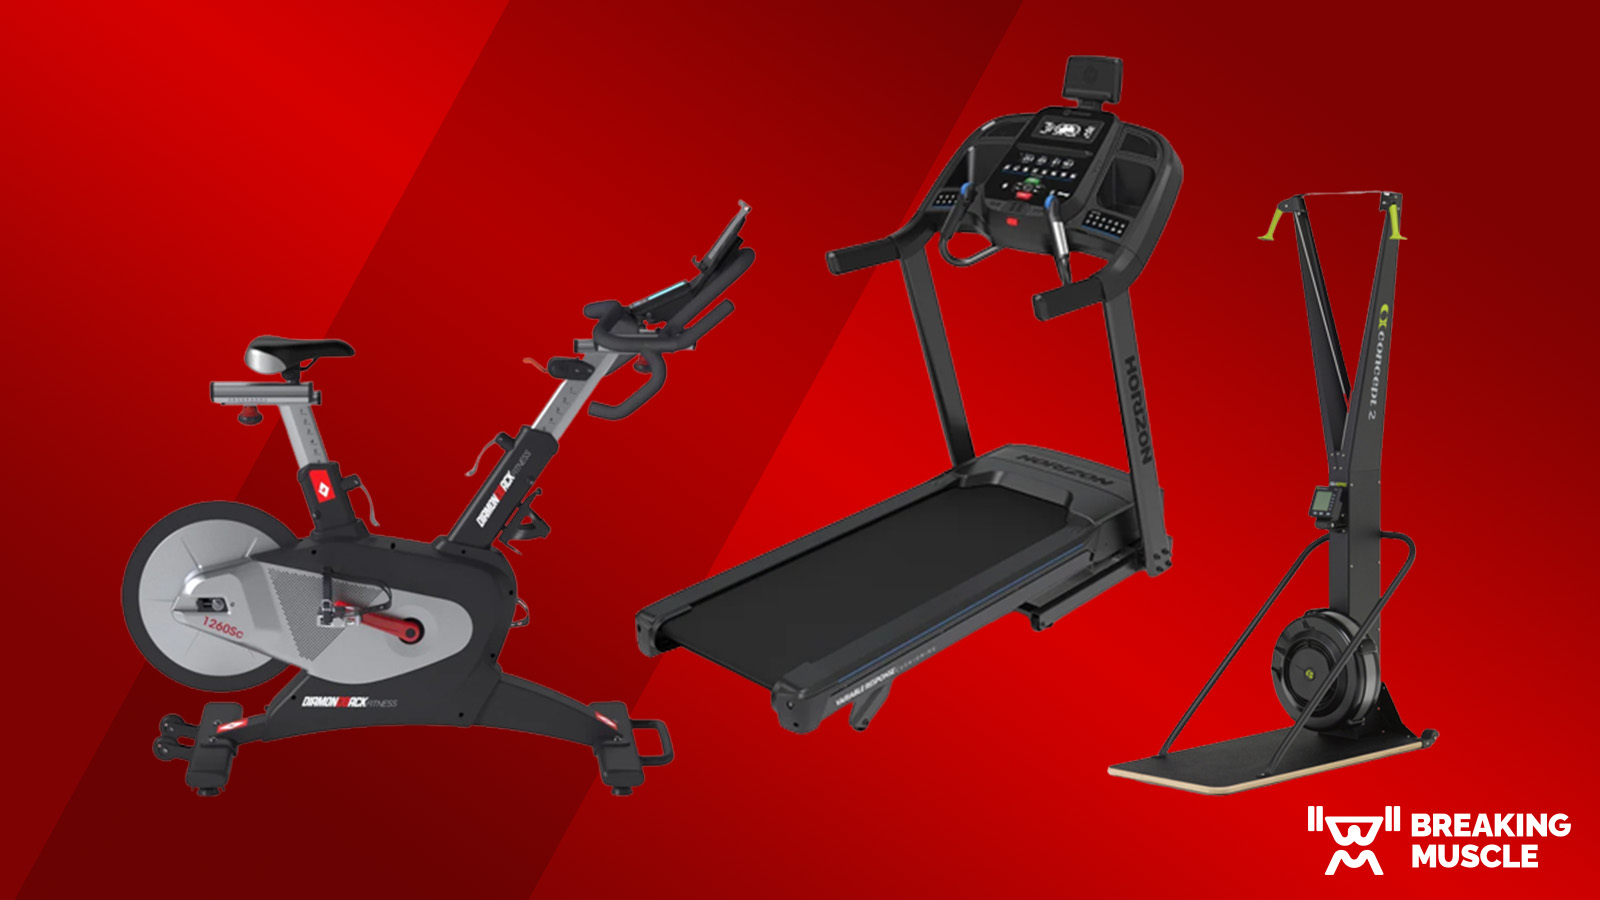 The Top 5 Cardio Machines That Are Good For Weight Loss – Fitbod